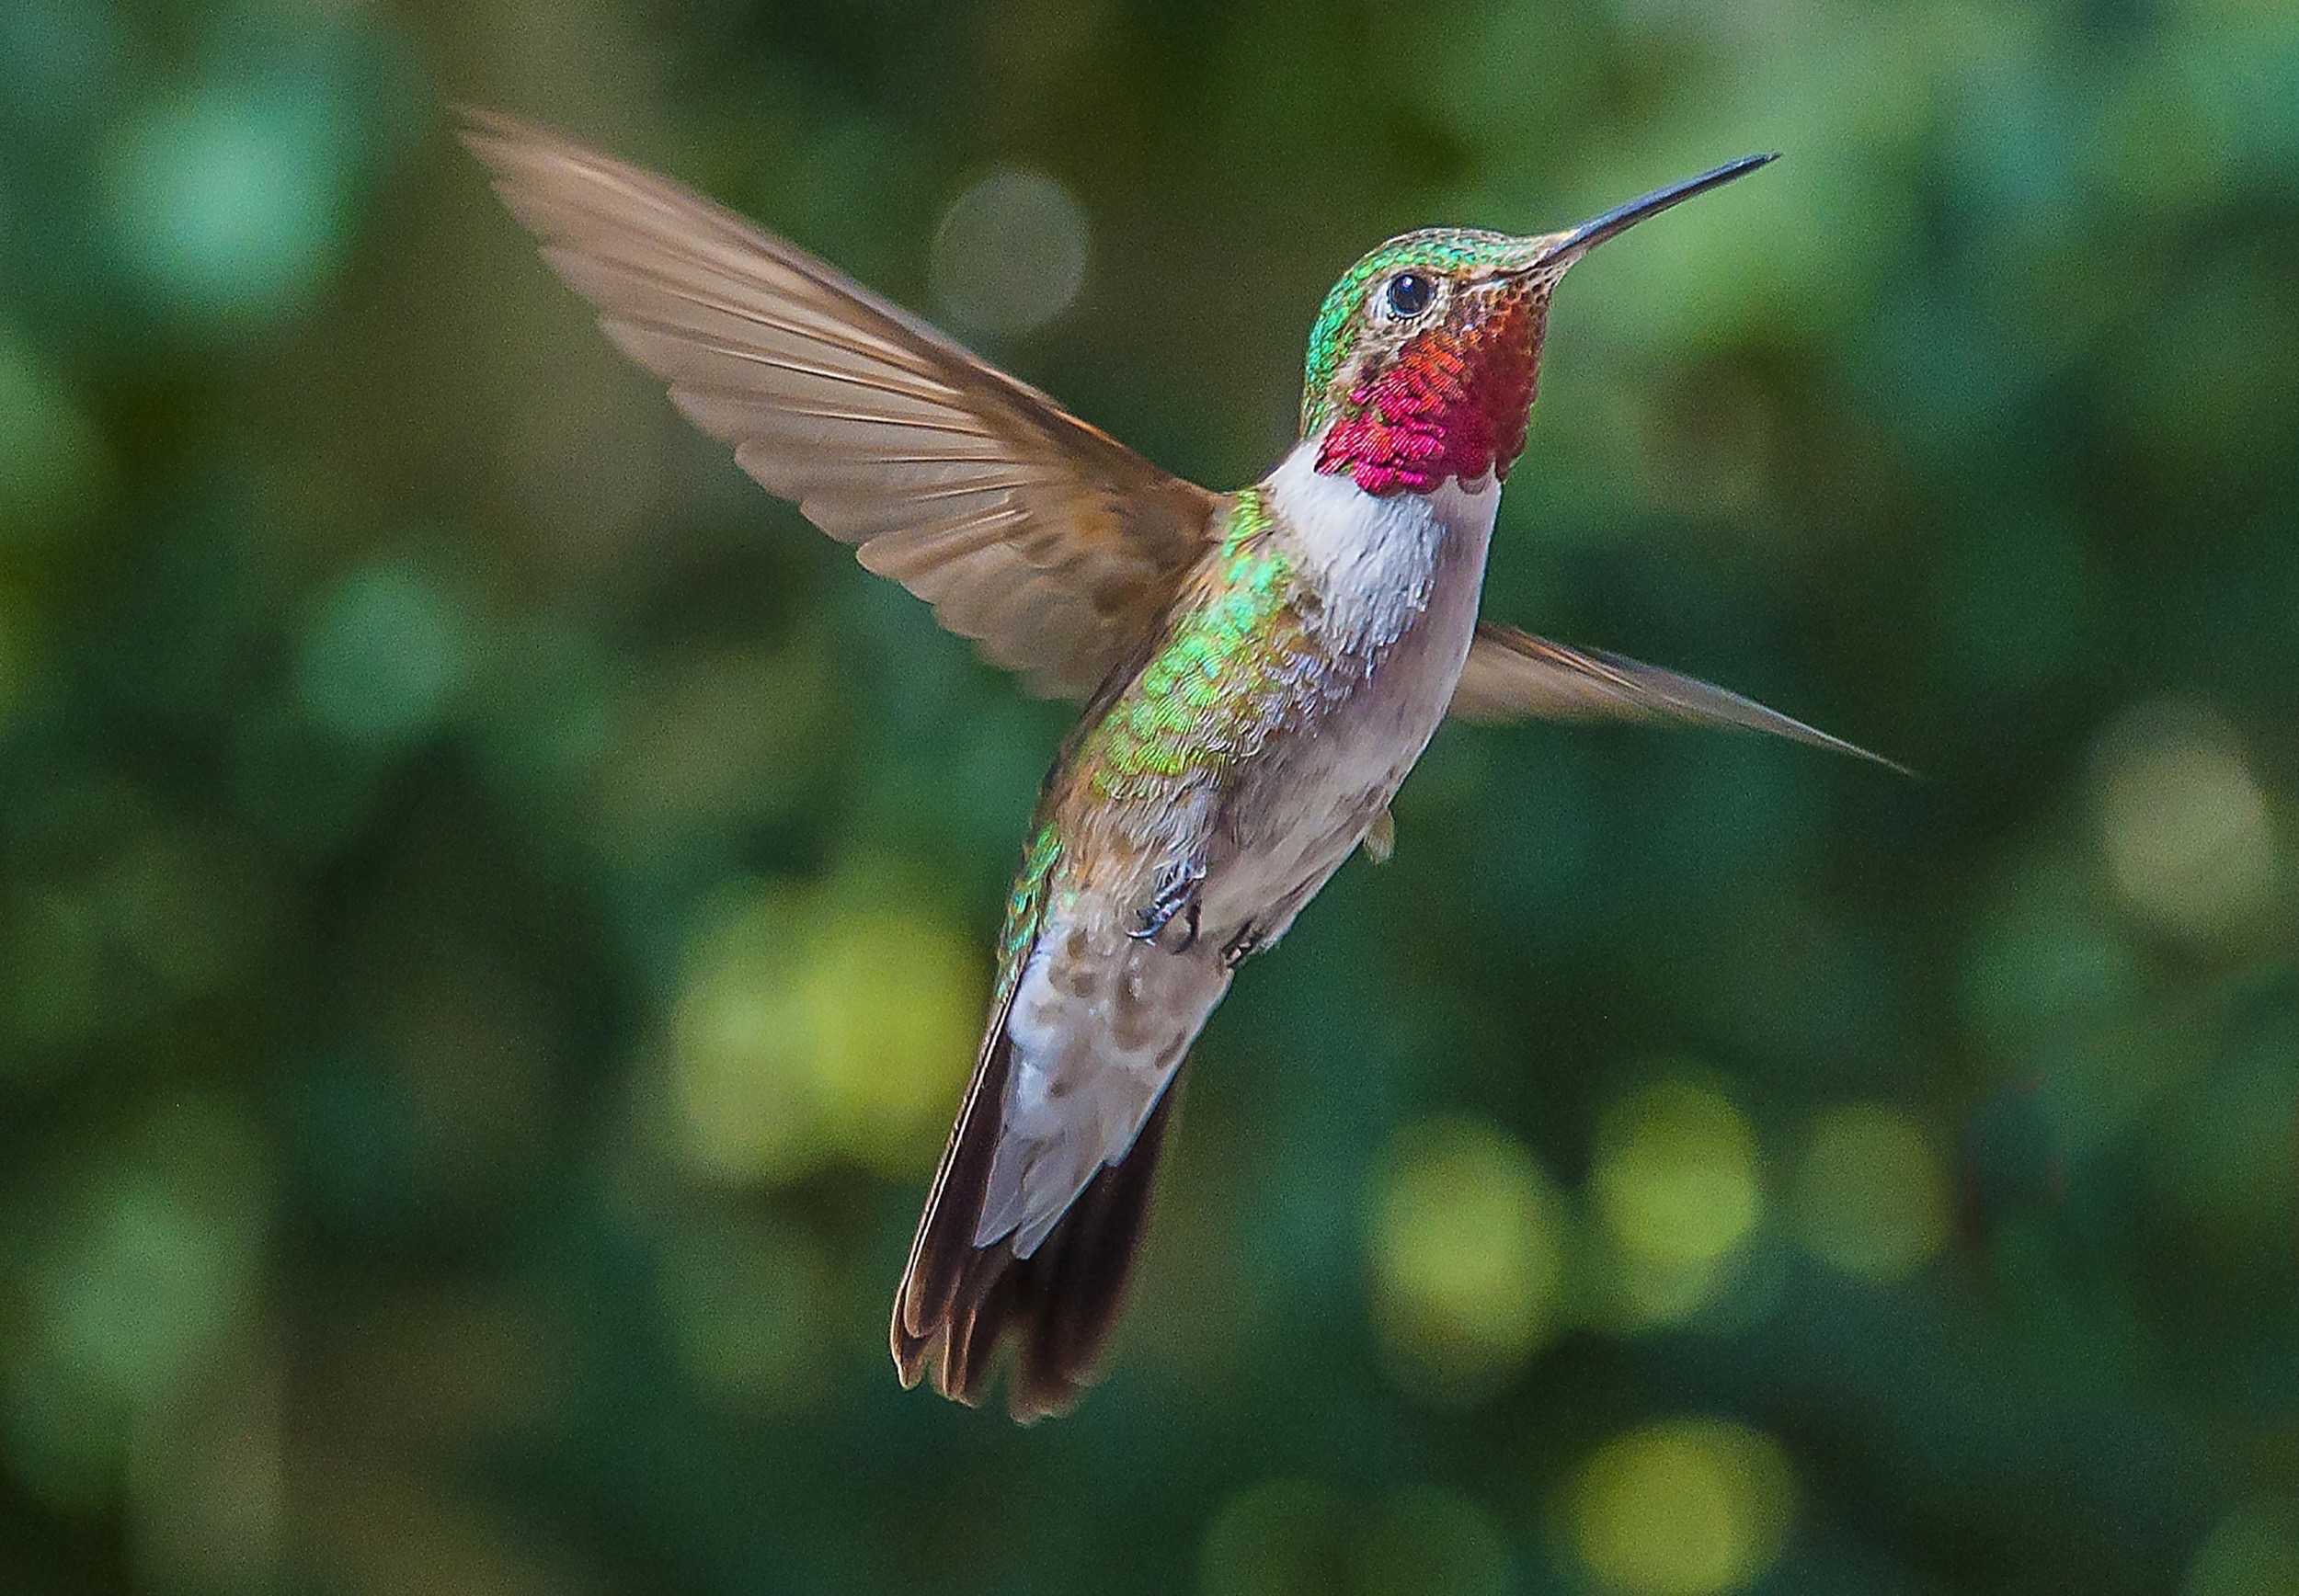 Hummingbird Flight Could Provide Insights for Biomimicry in Aerial Vehicles